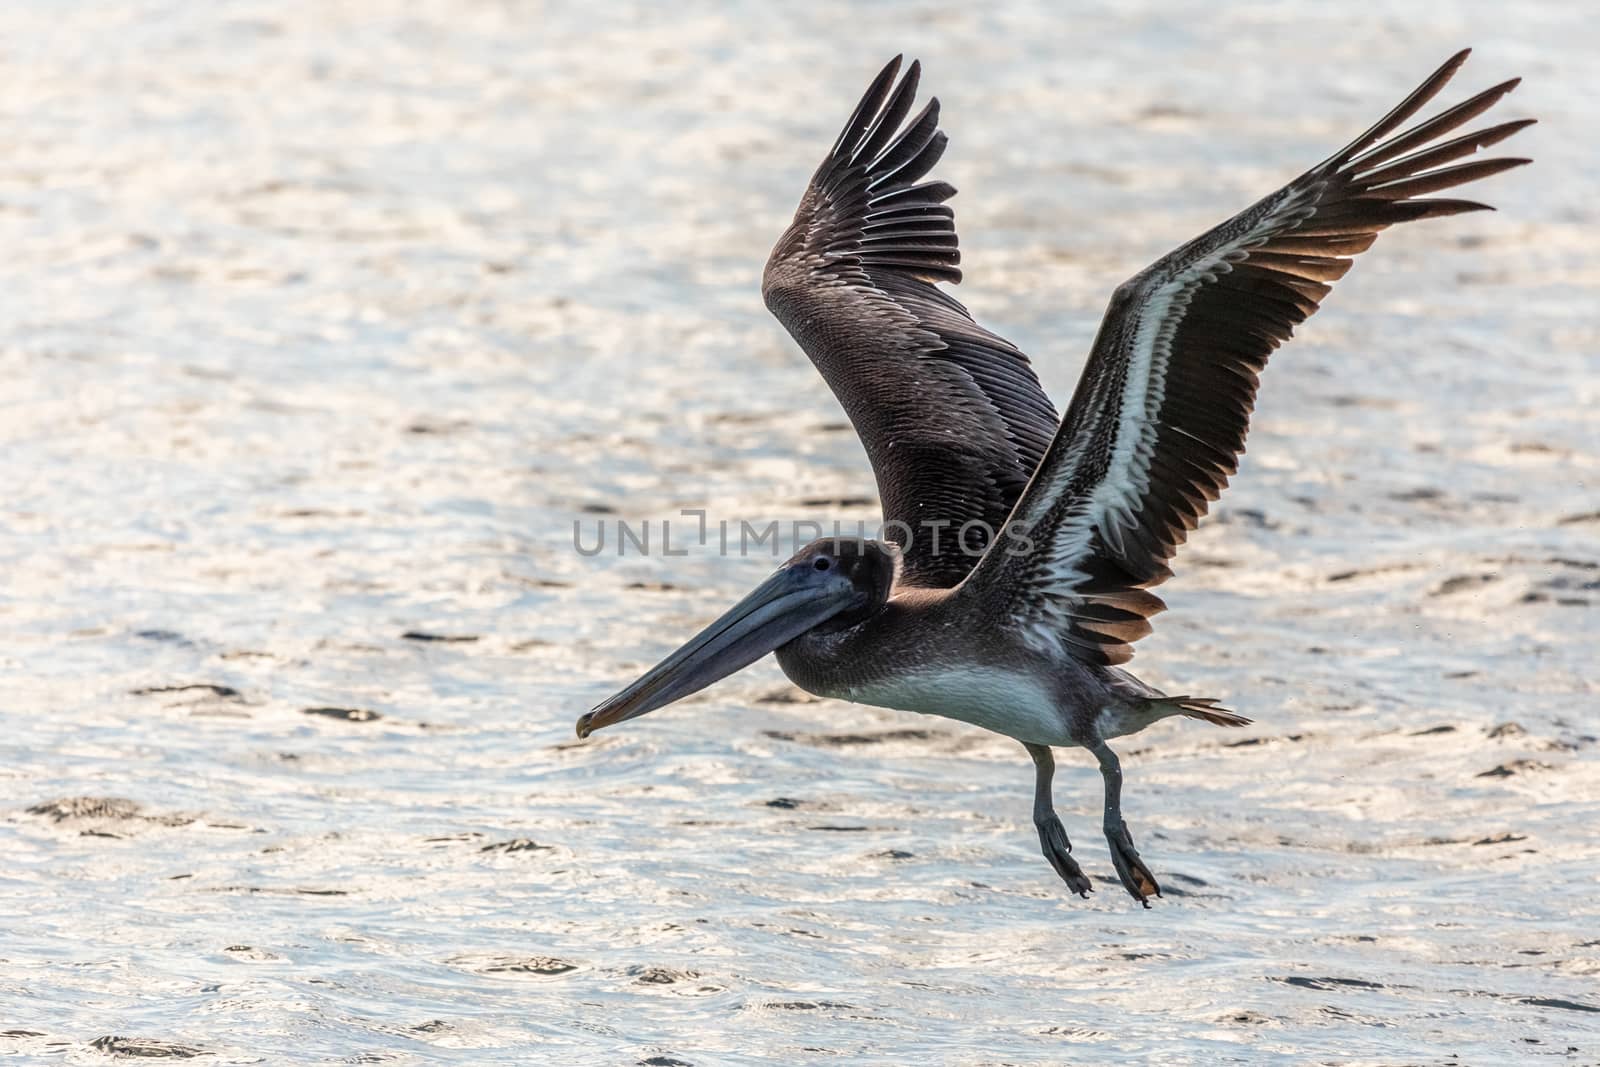 Pelican flying from the water surface, near Carriacou island, Gr by ambeon